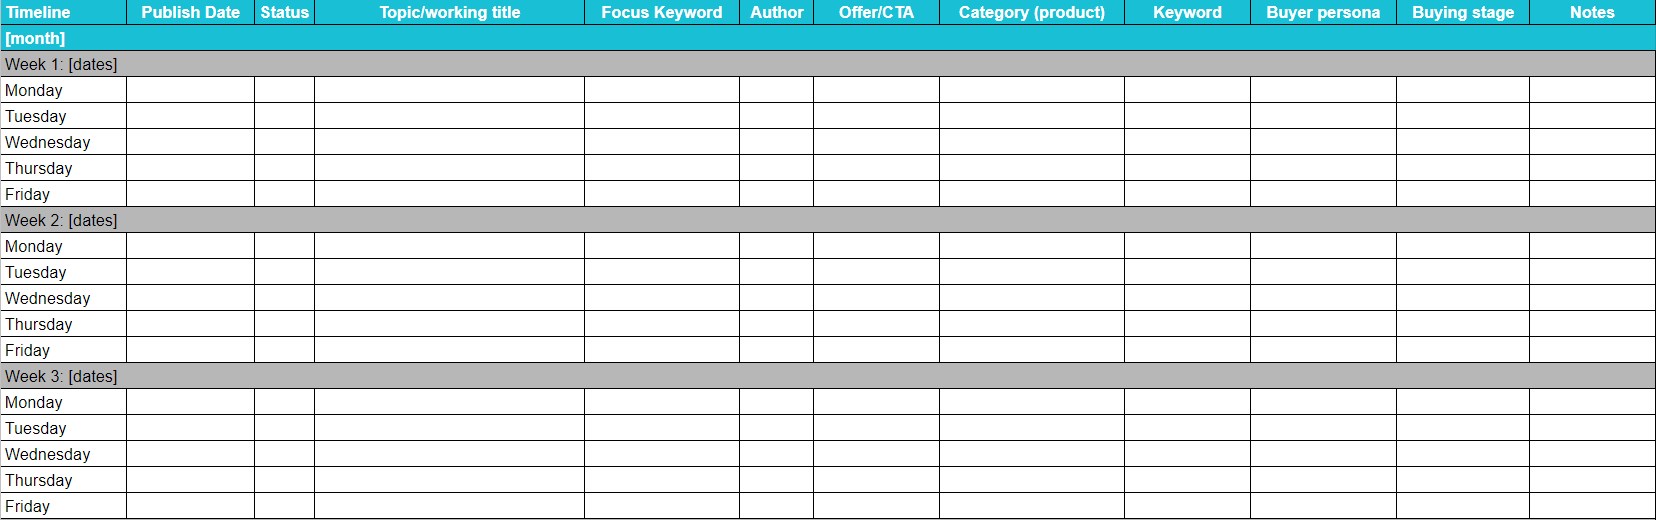 Sample content calendar to track blog topic ideas